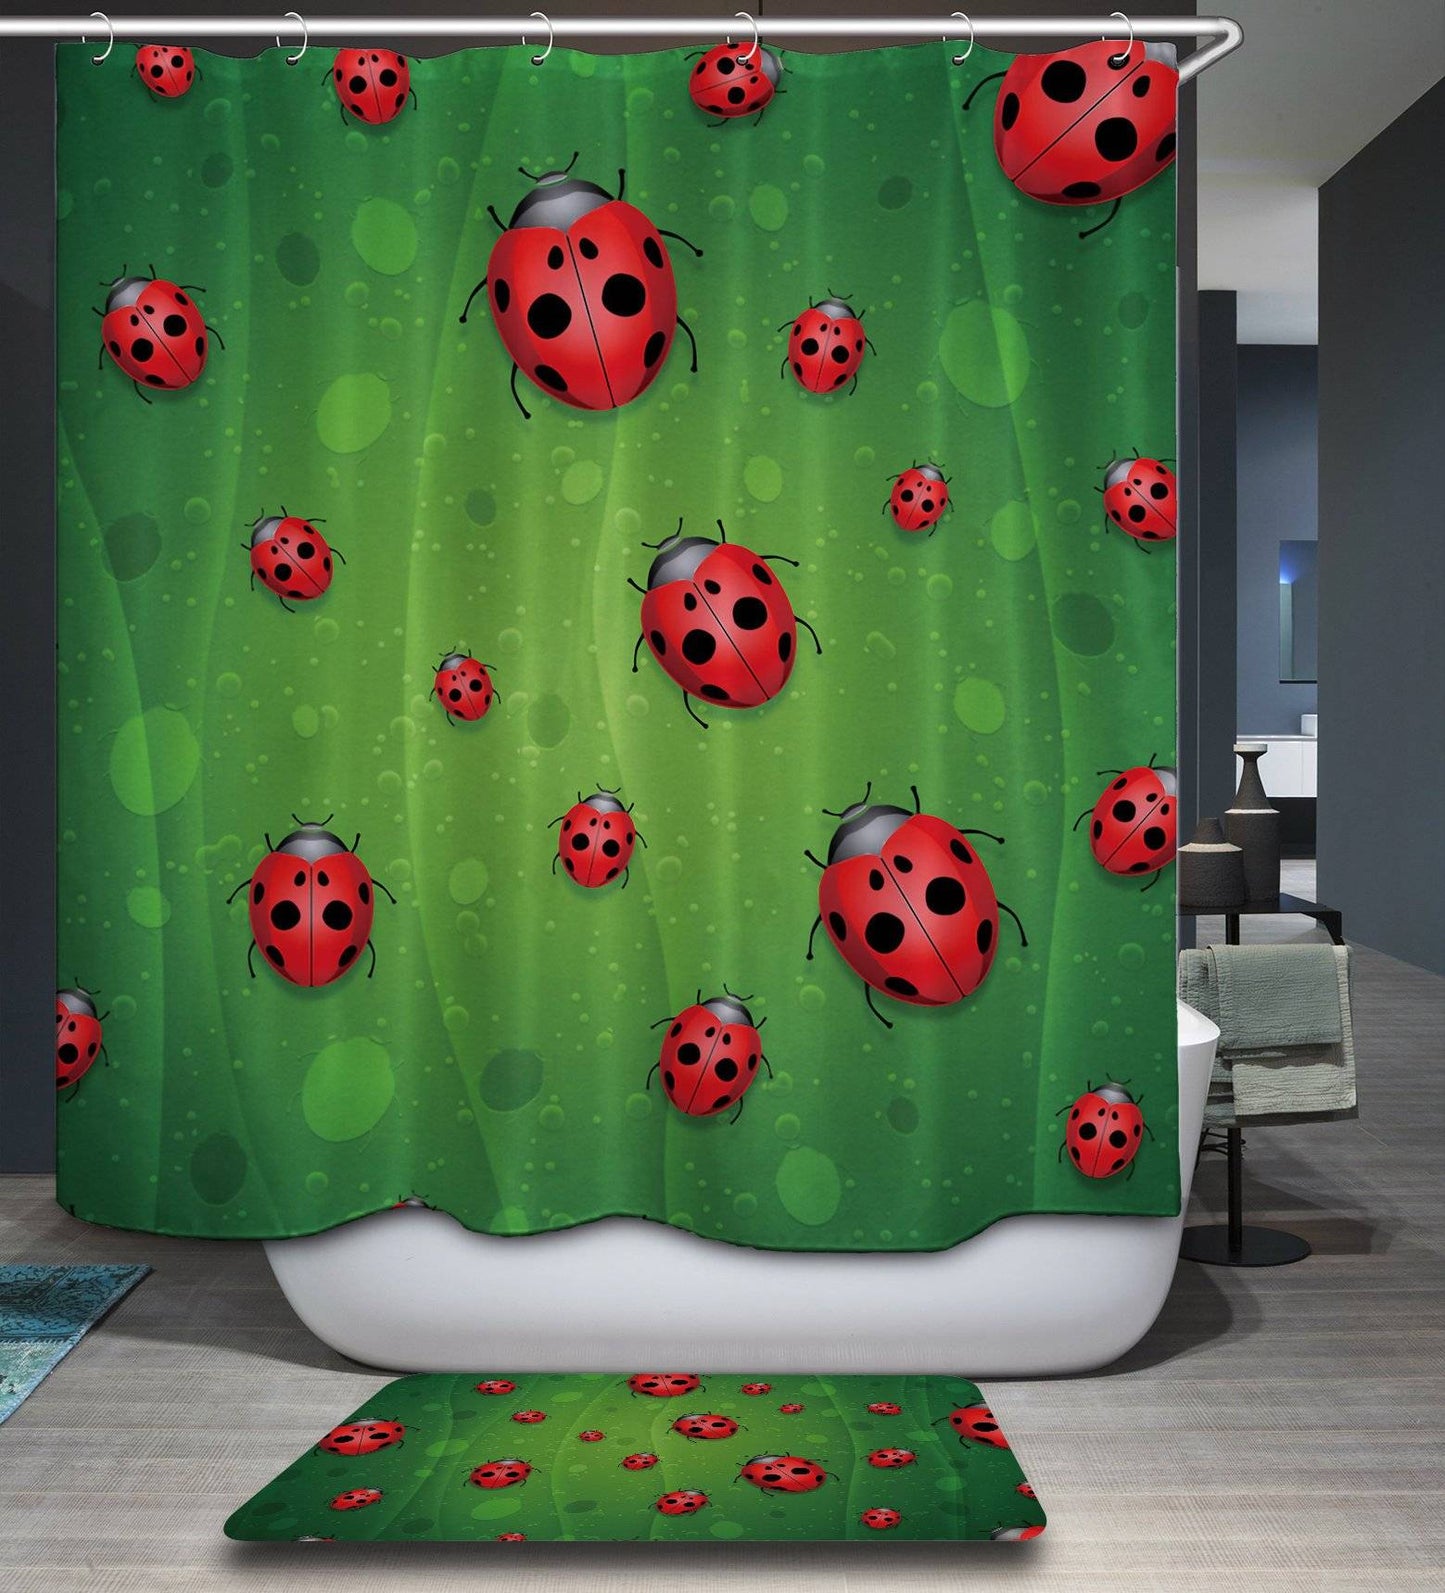 Green Leaf Vein Backdrop Seamless Insect Ladybug Shower Curtain